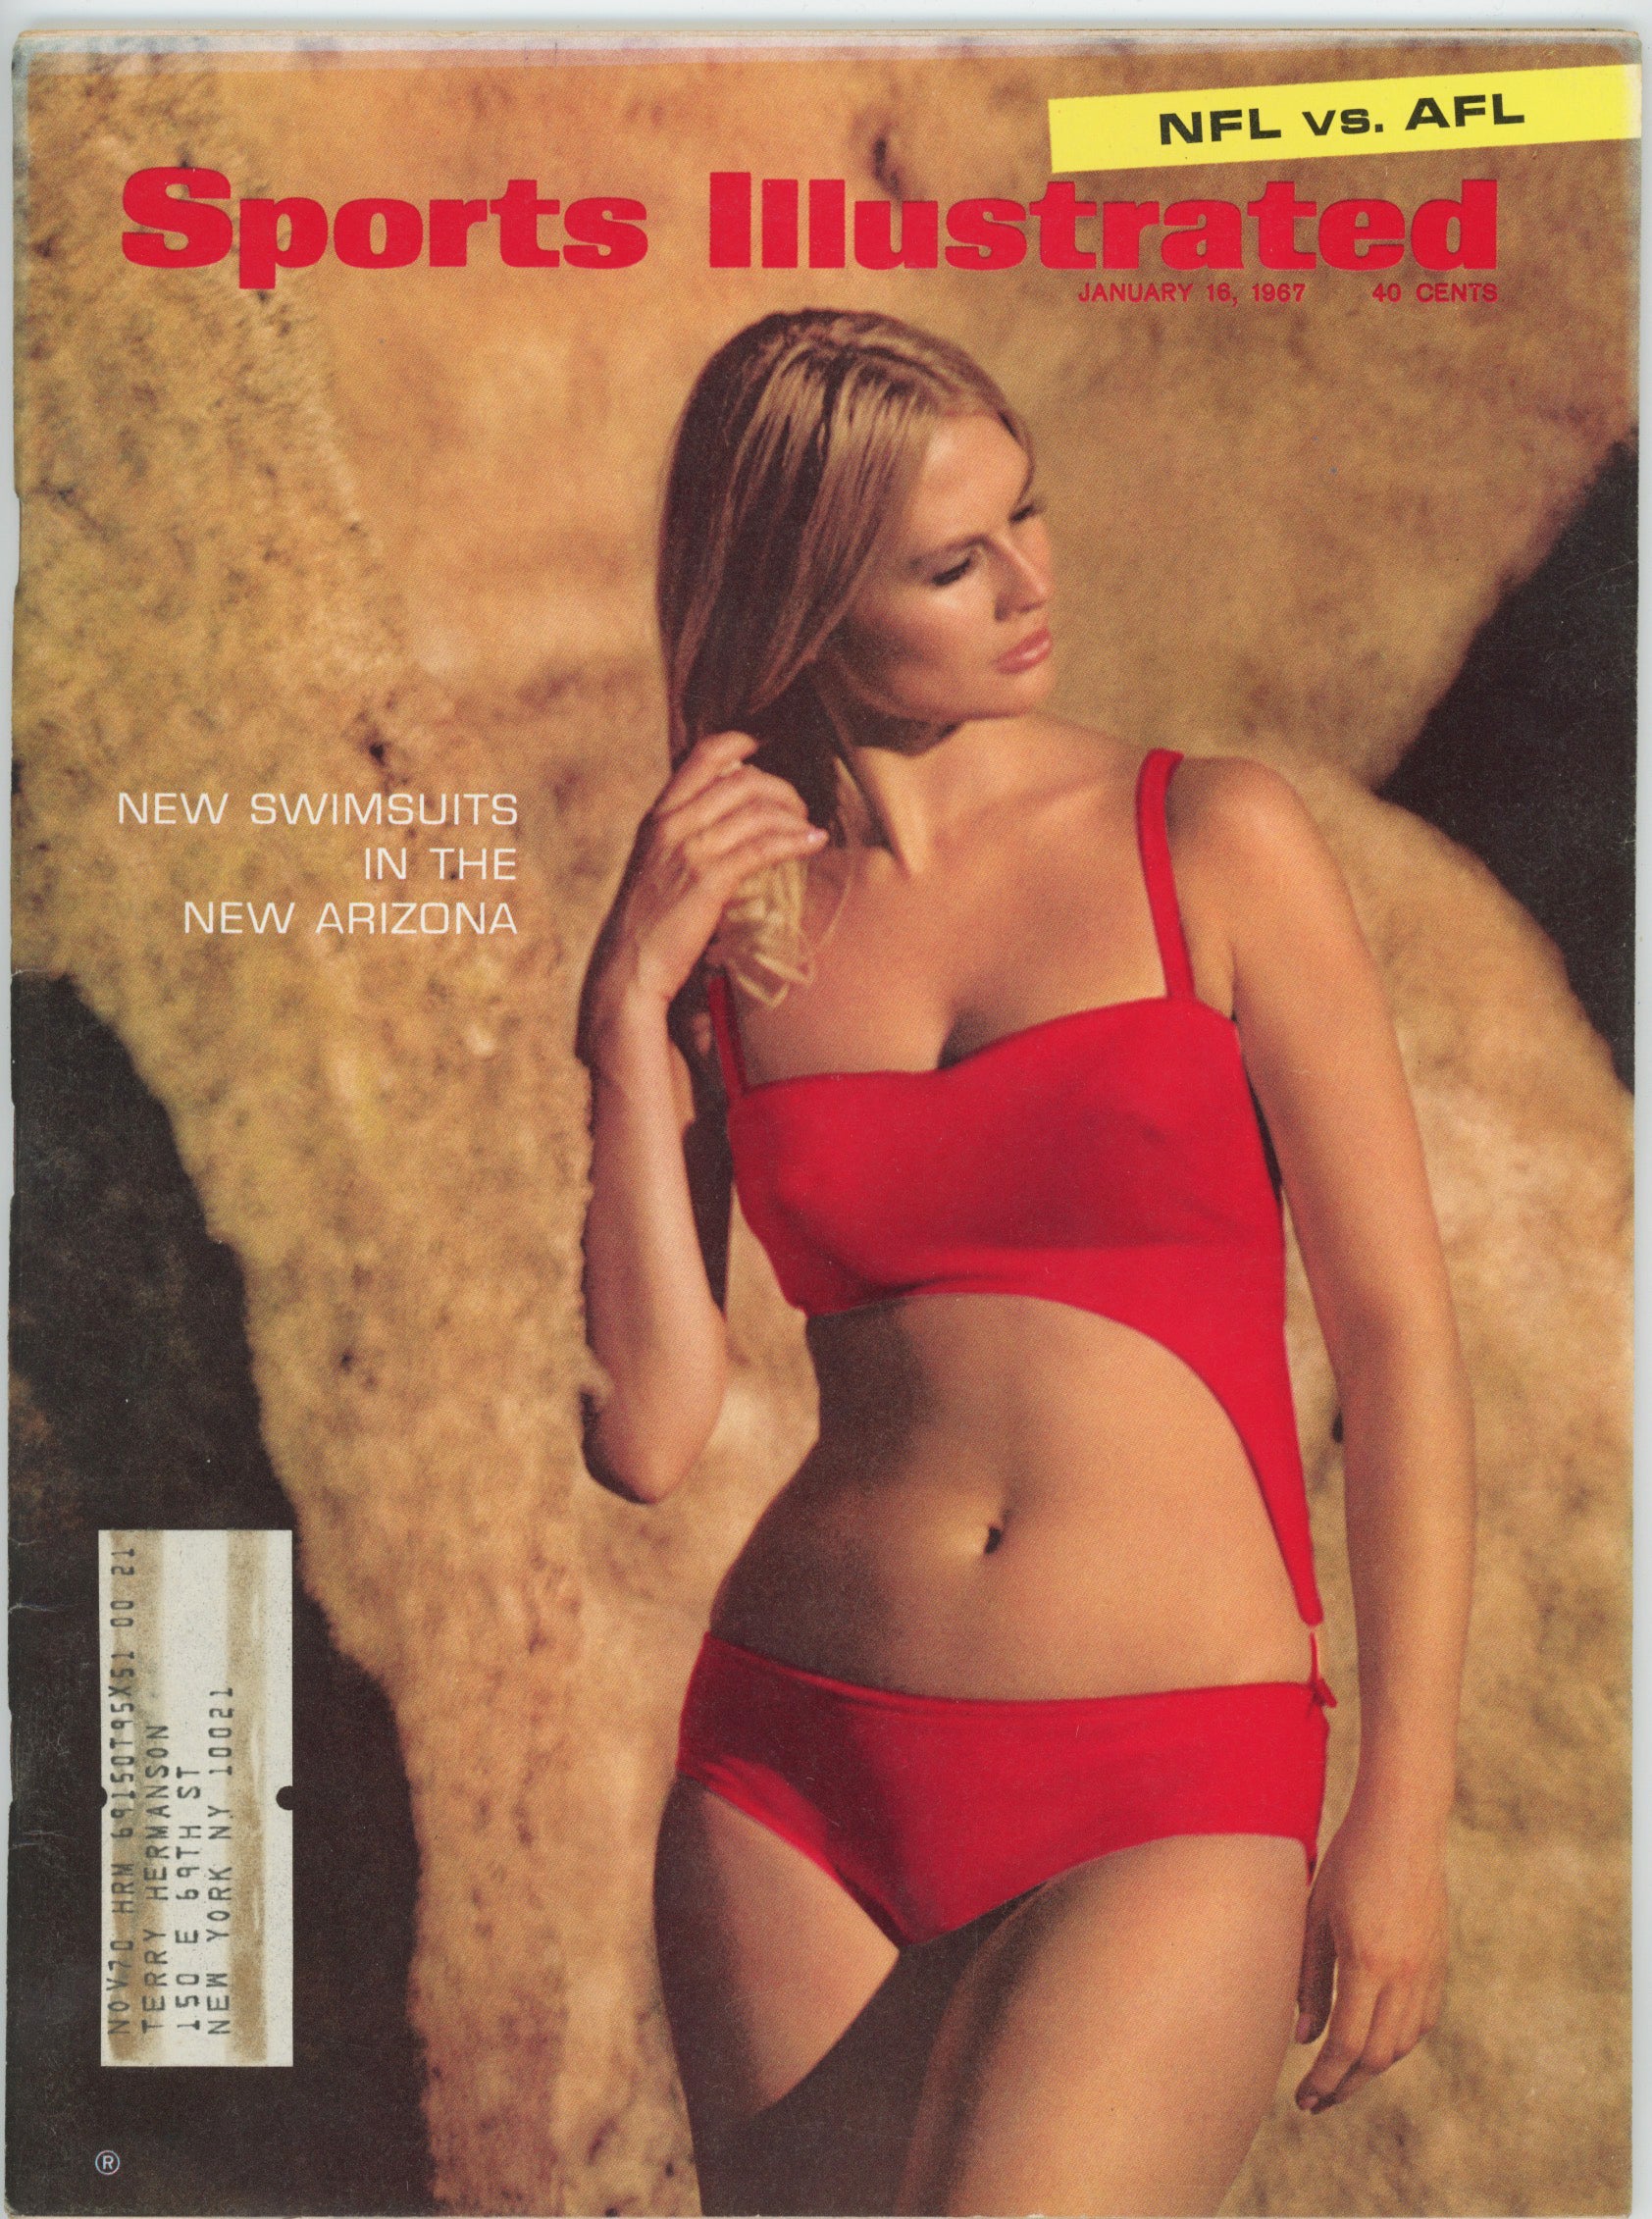 Marilyn Tindall “Swimsuit Issue” 1/16/67 EX ML